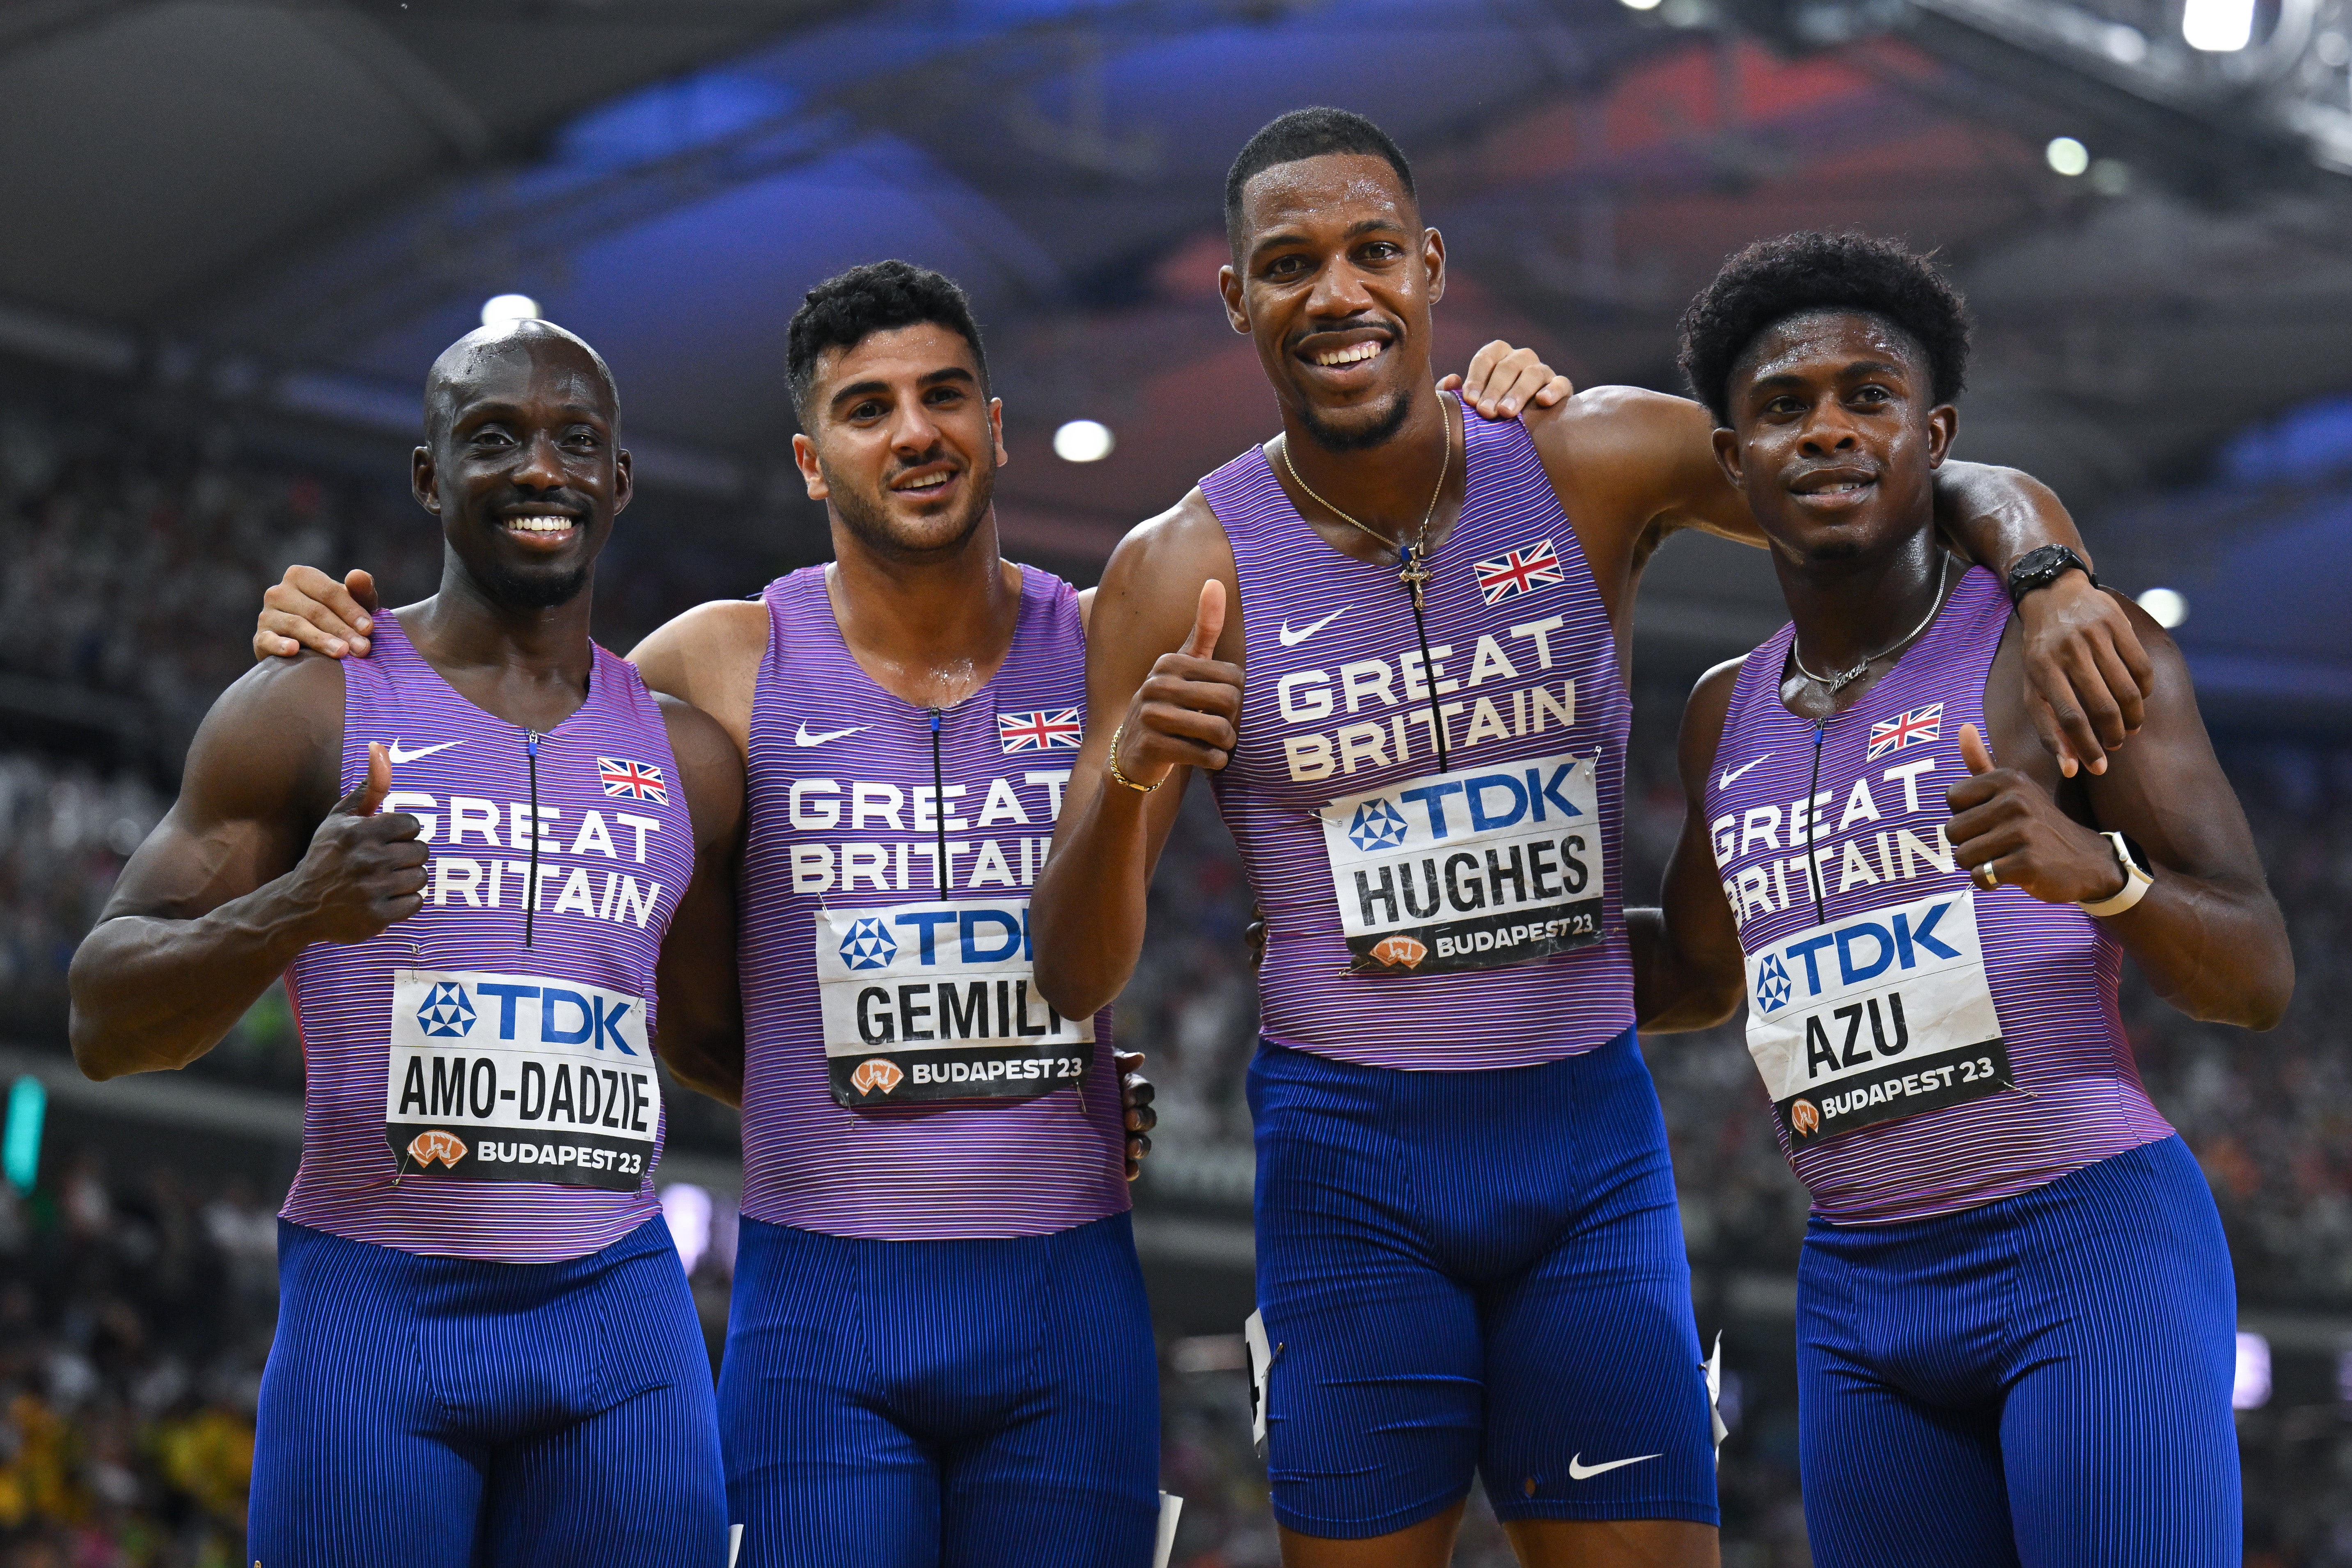 Eugene Amo-Dadzie, Adam Gemili, Zharnel Hughes, and Jeremiah Azu after the men’s 4x100m relay final in Budapest